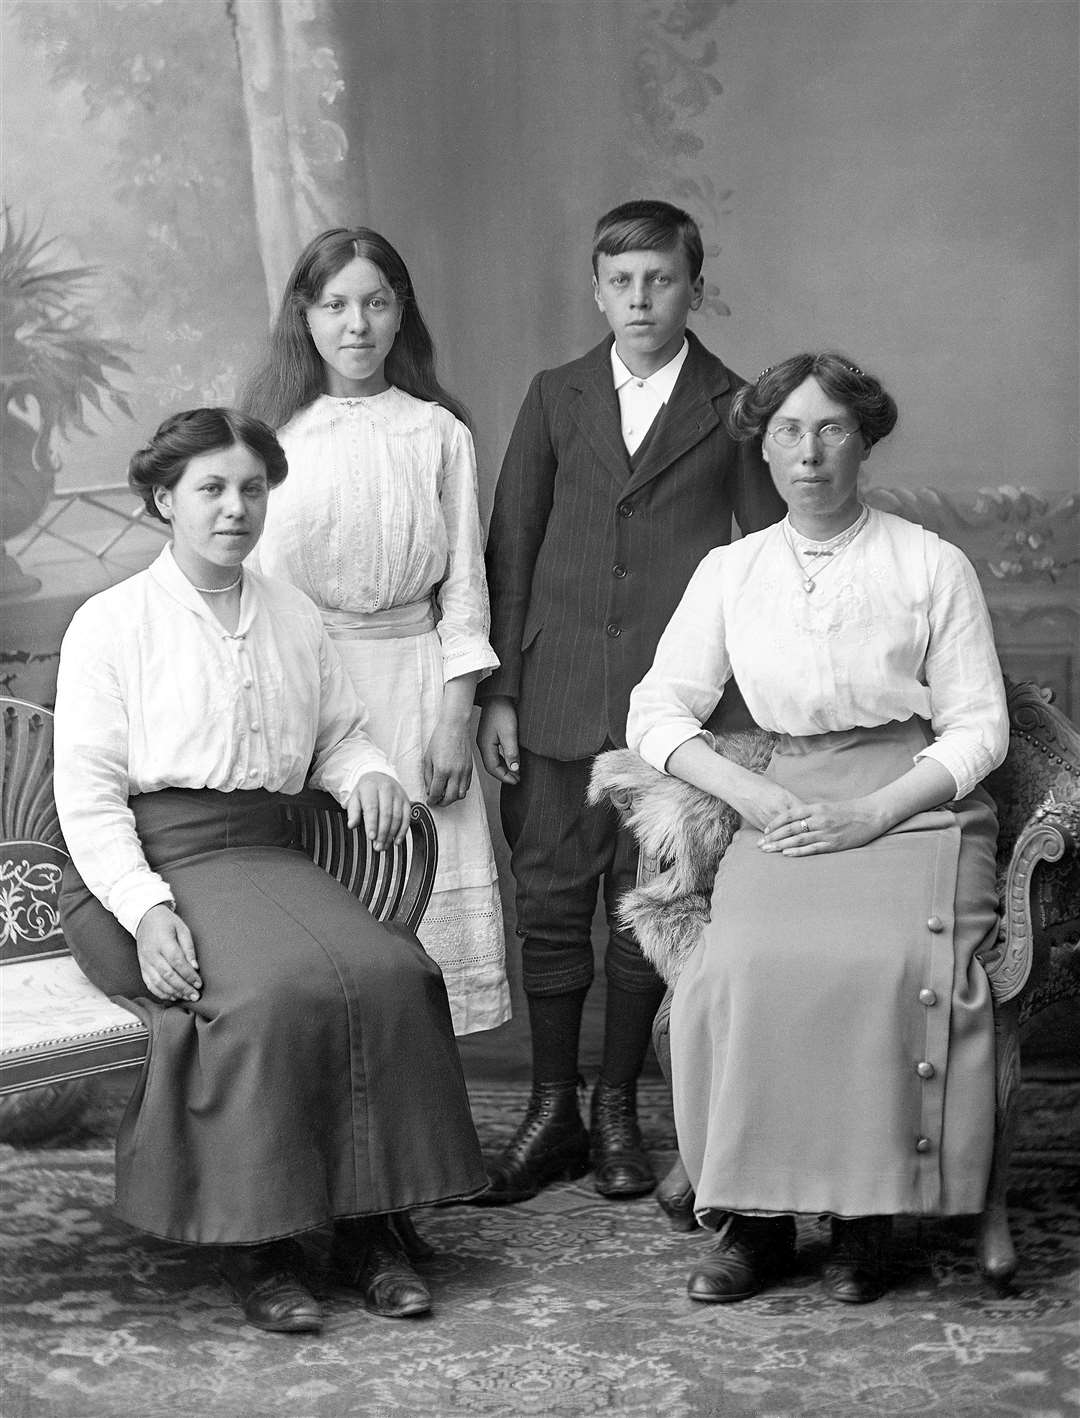 Richard Patrick's grandfather Donn, with his two sisters, Helen (standing) and Chris (sitting) along with aunt Esther Polson. Picture courtesy of the Johnston Collection.